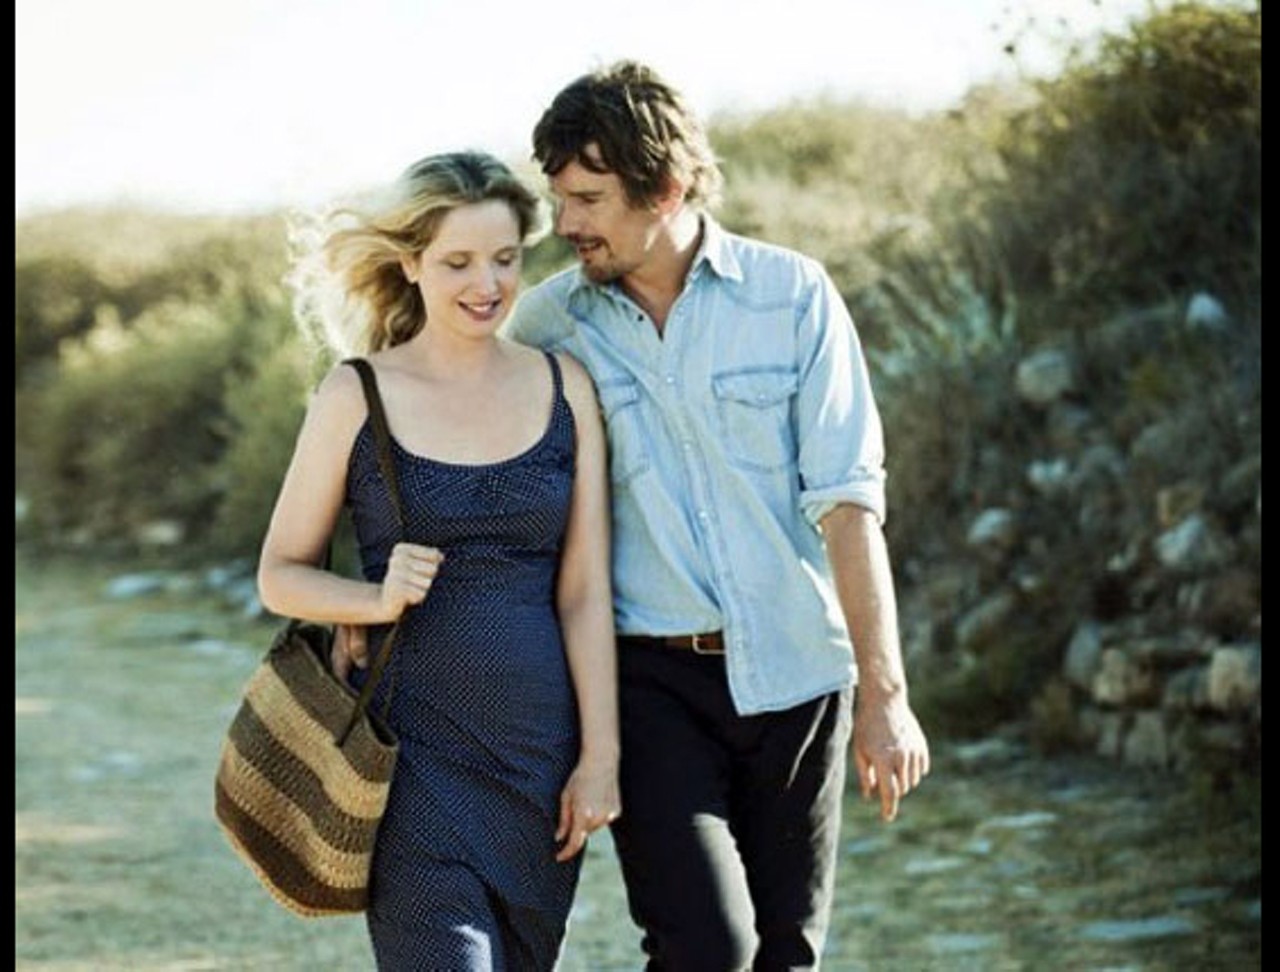 3. Ethan Hawke and Julie Delpy in Before Midnight